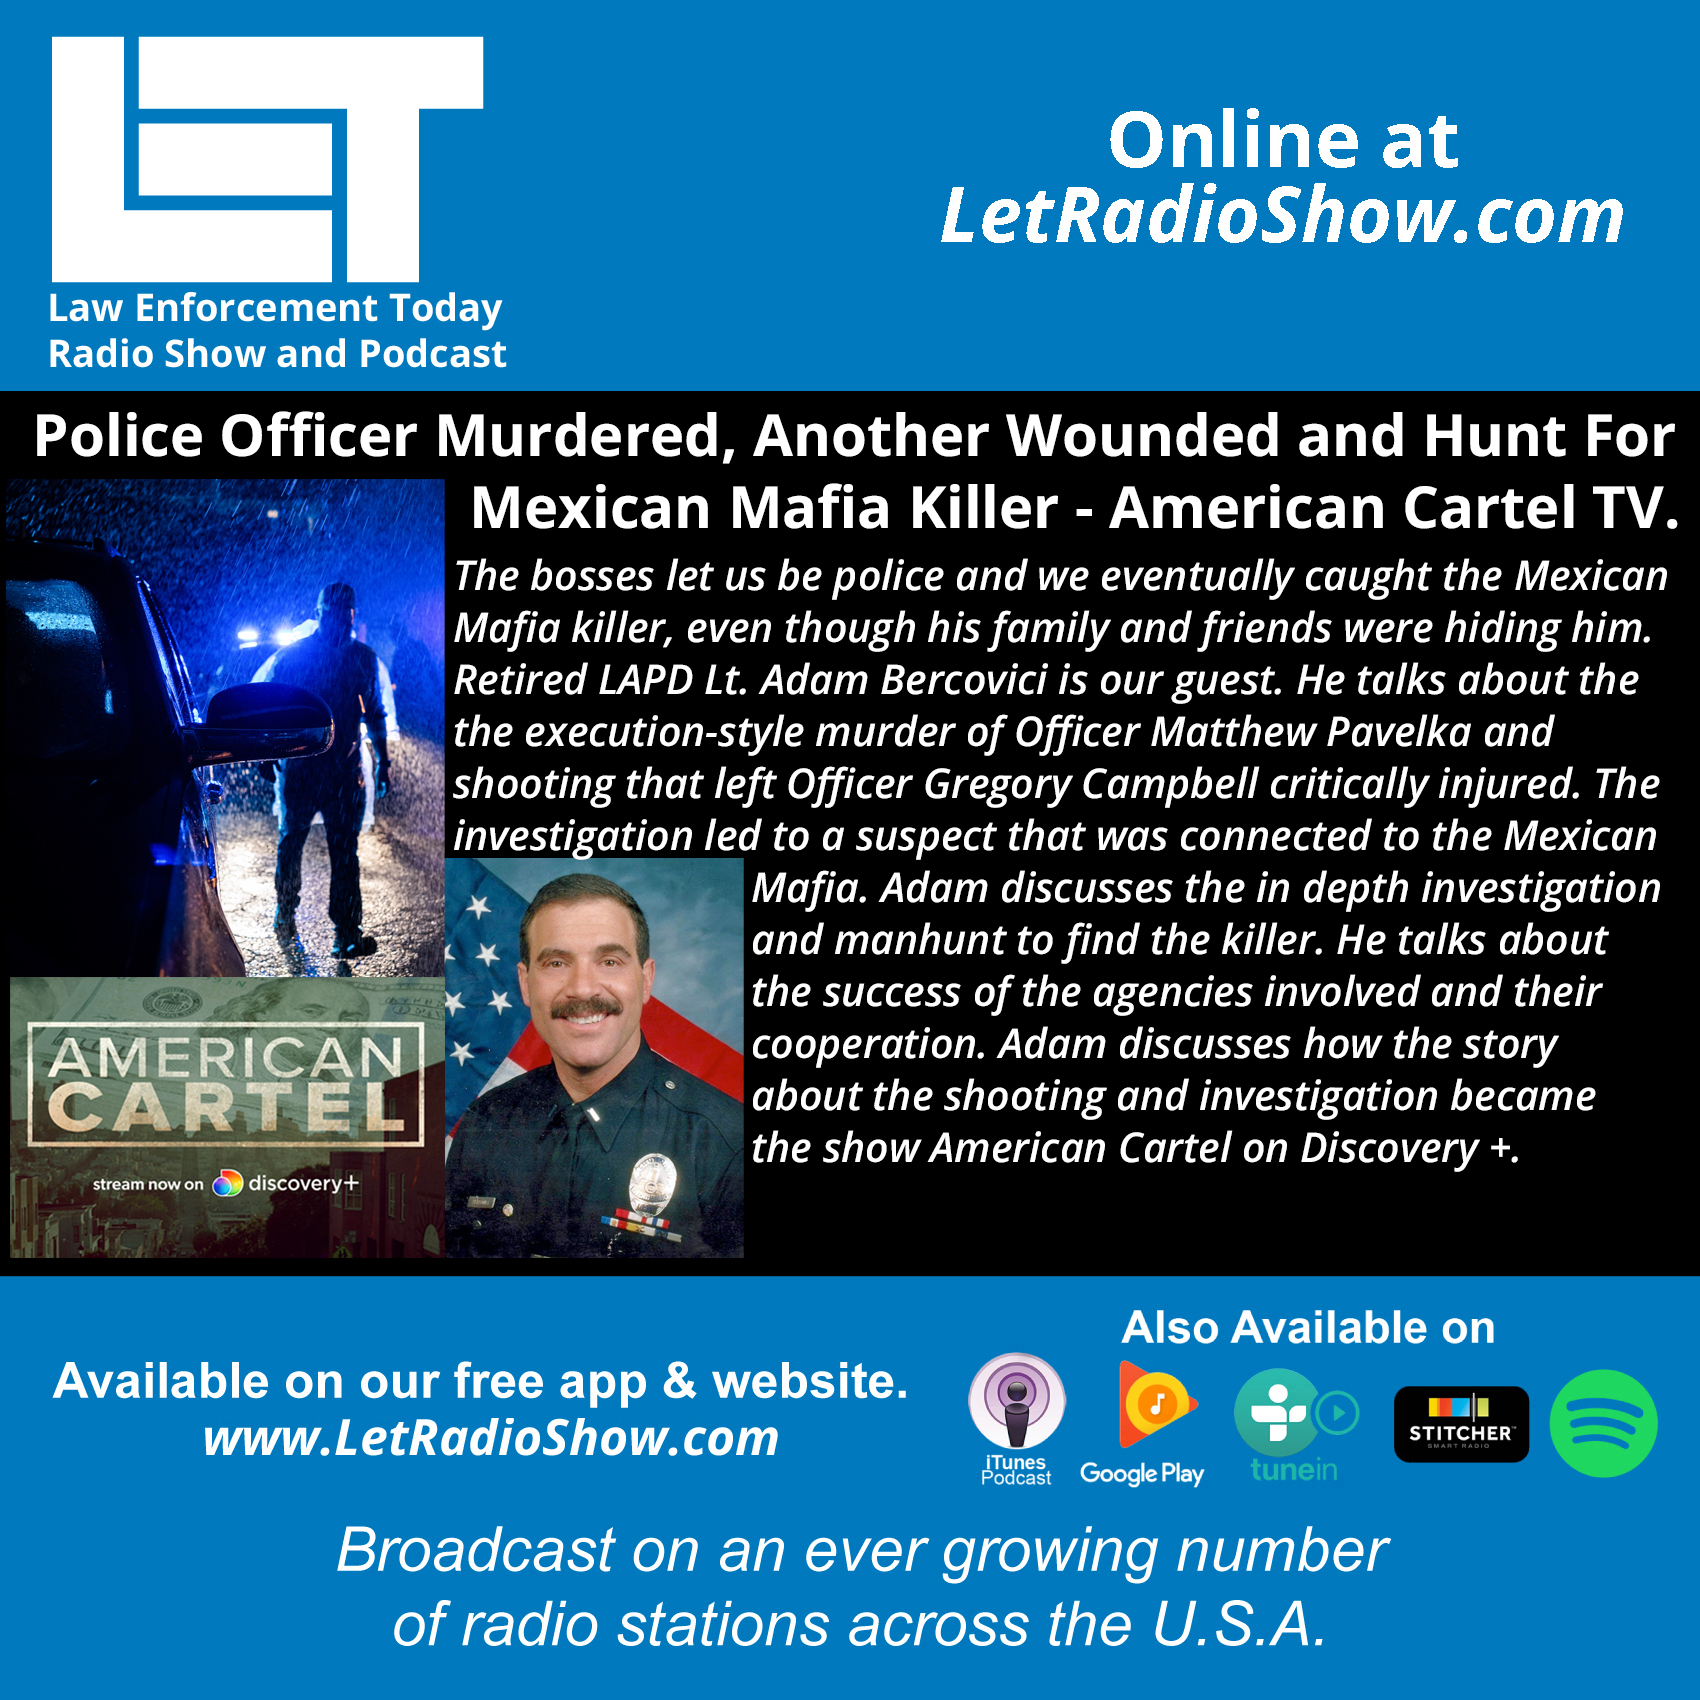 Police Officer Murdered, Another Wounded, Hunt For Killer. American Cartel.